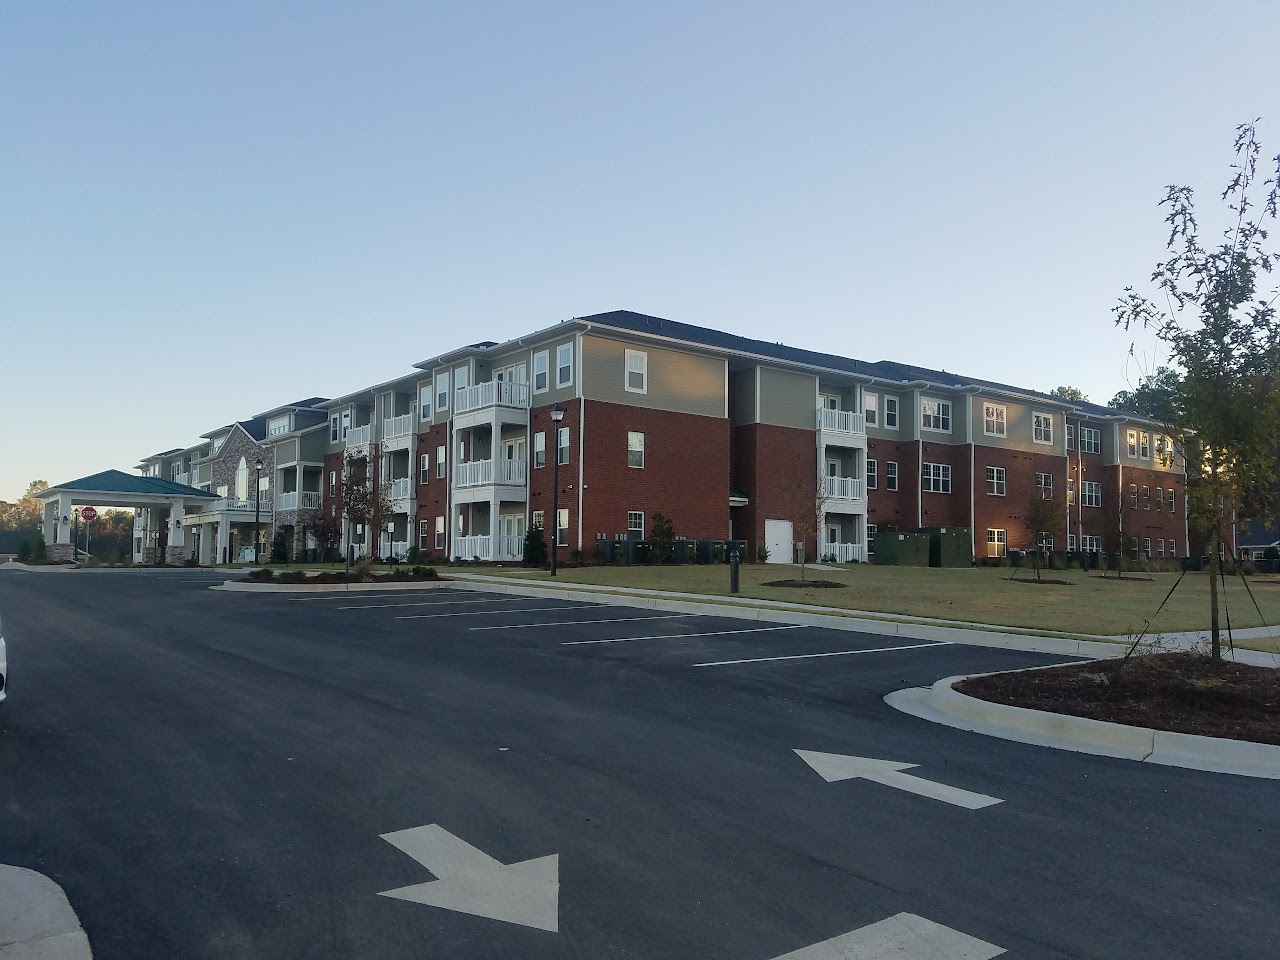 Photo of WISTERIA PLACE, PHASE I. Affordable housing located at 100 WISTERIA GARDENS CIRCLE NEWNAN, GA 30263